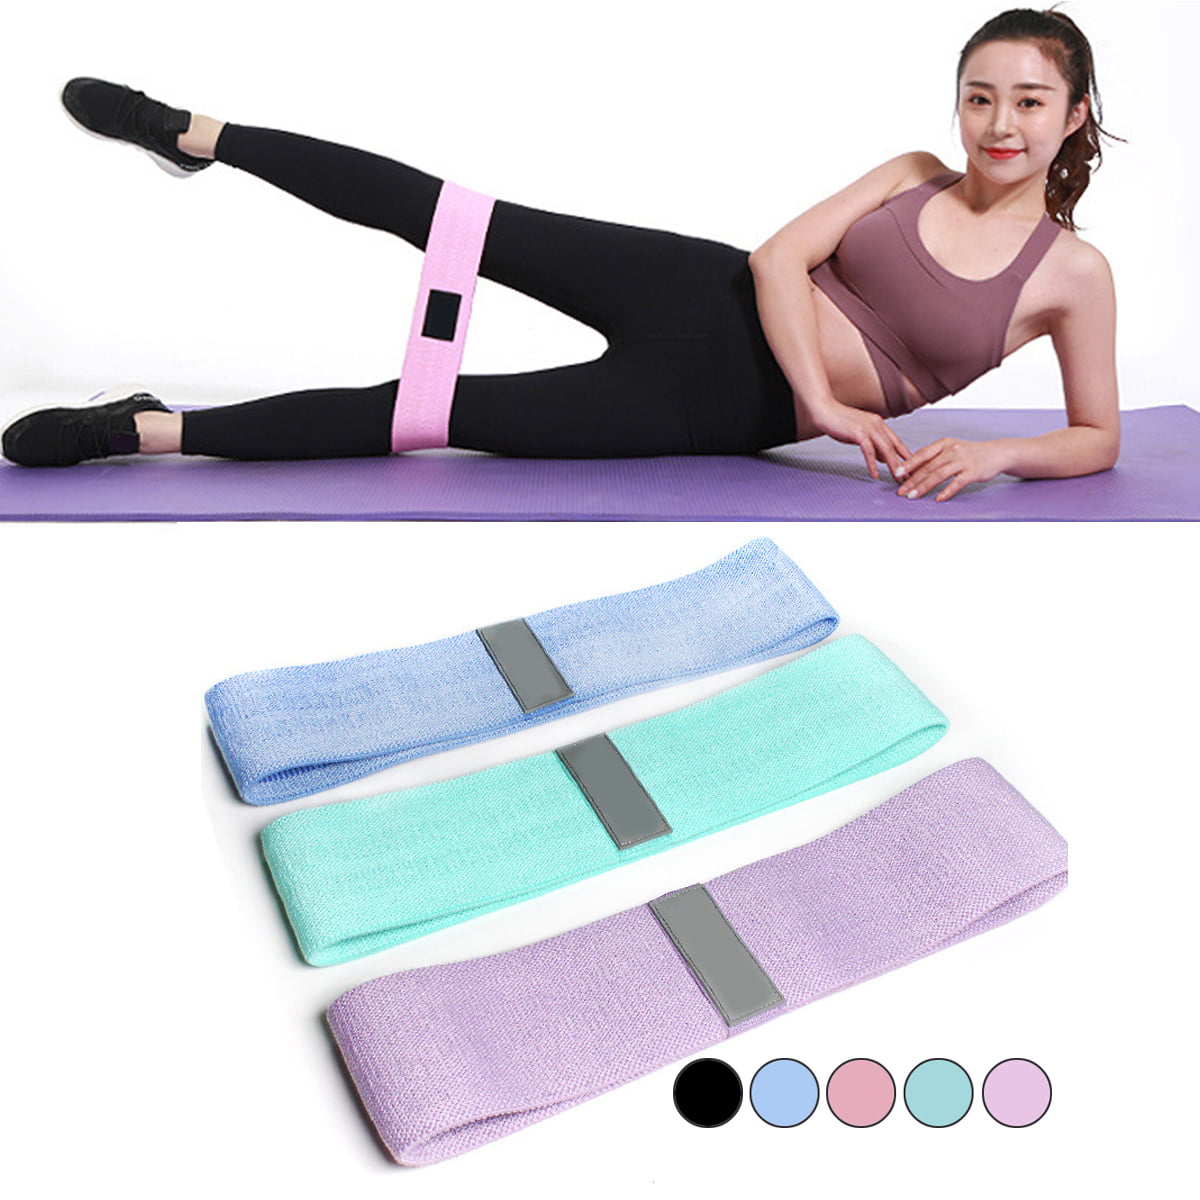 Non-Slip Fabric Resistance Bands & Glute Bands for Lunges Premium Hip Band & Booty Bands for Women & Men Ideal Booty Bands for Squats RIMSports Hip Resistance Bands for Legs & Butt